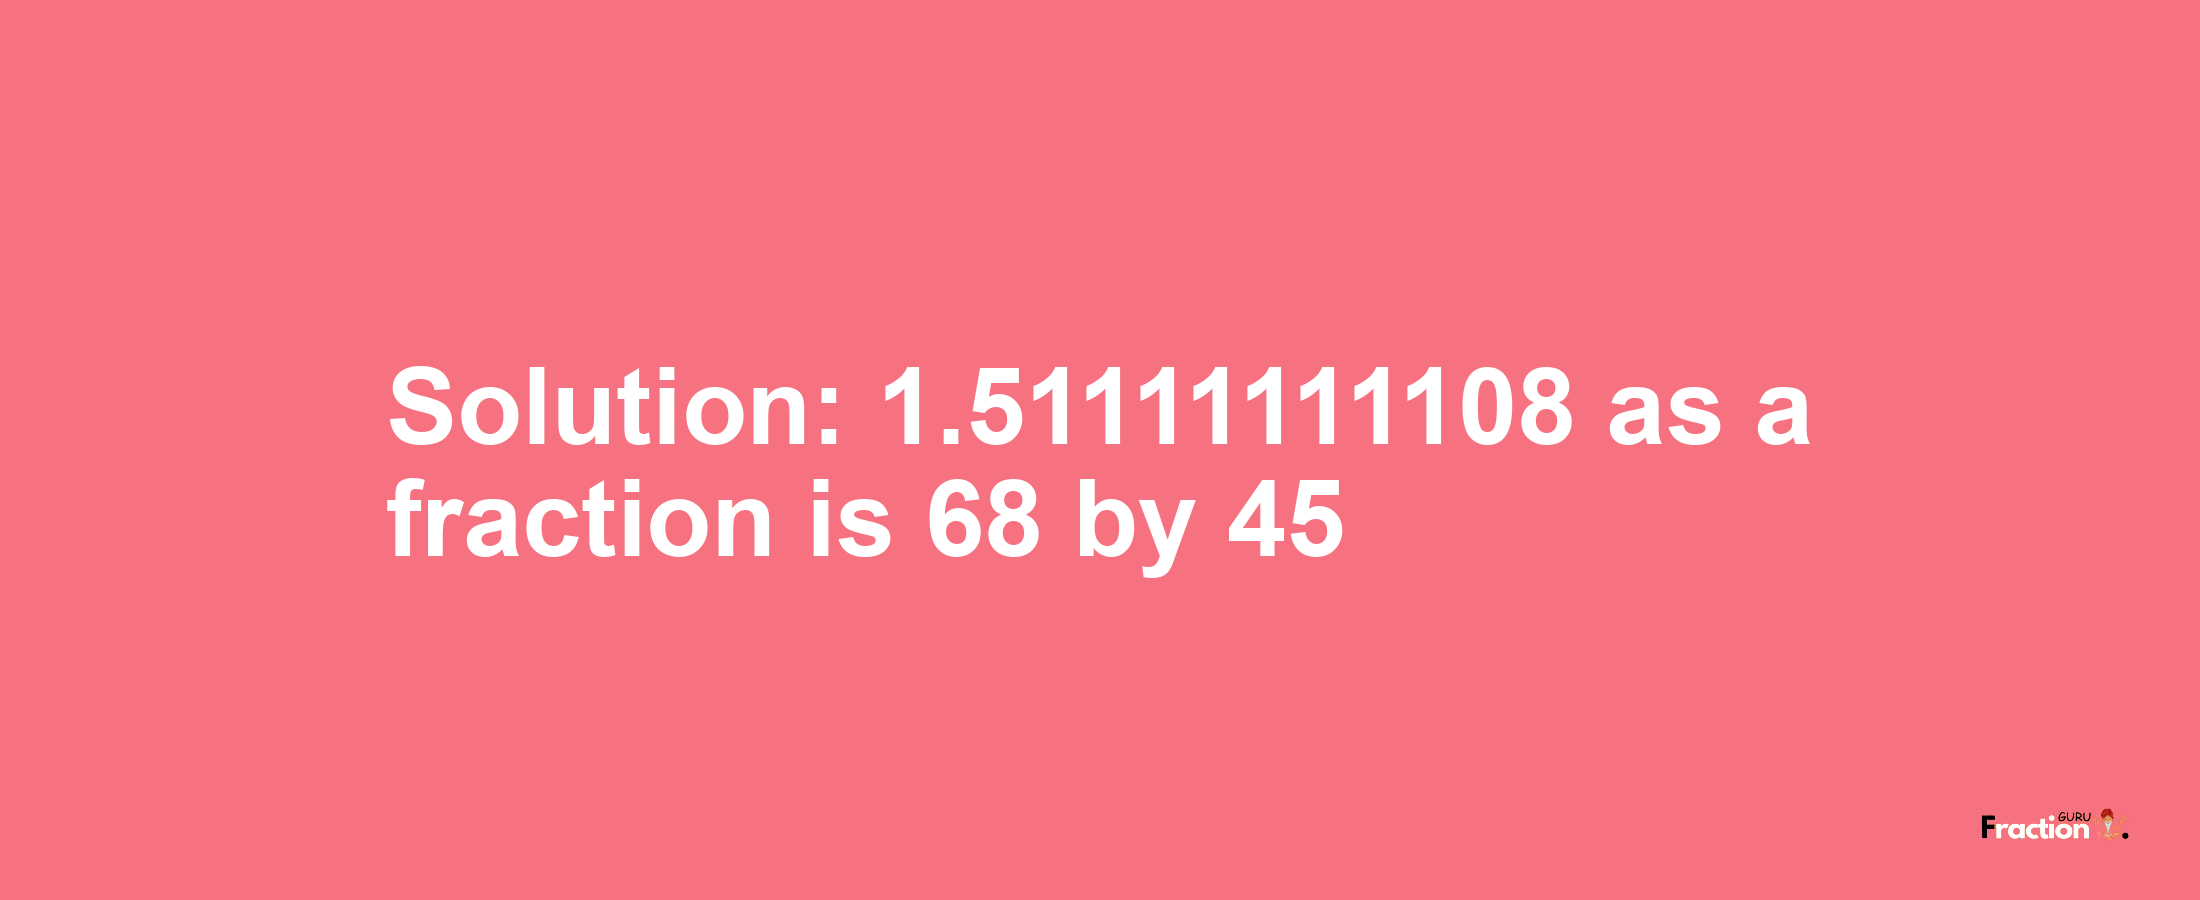 Solution:1.51111111108 as a fraction is 68/45